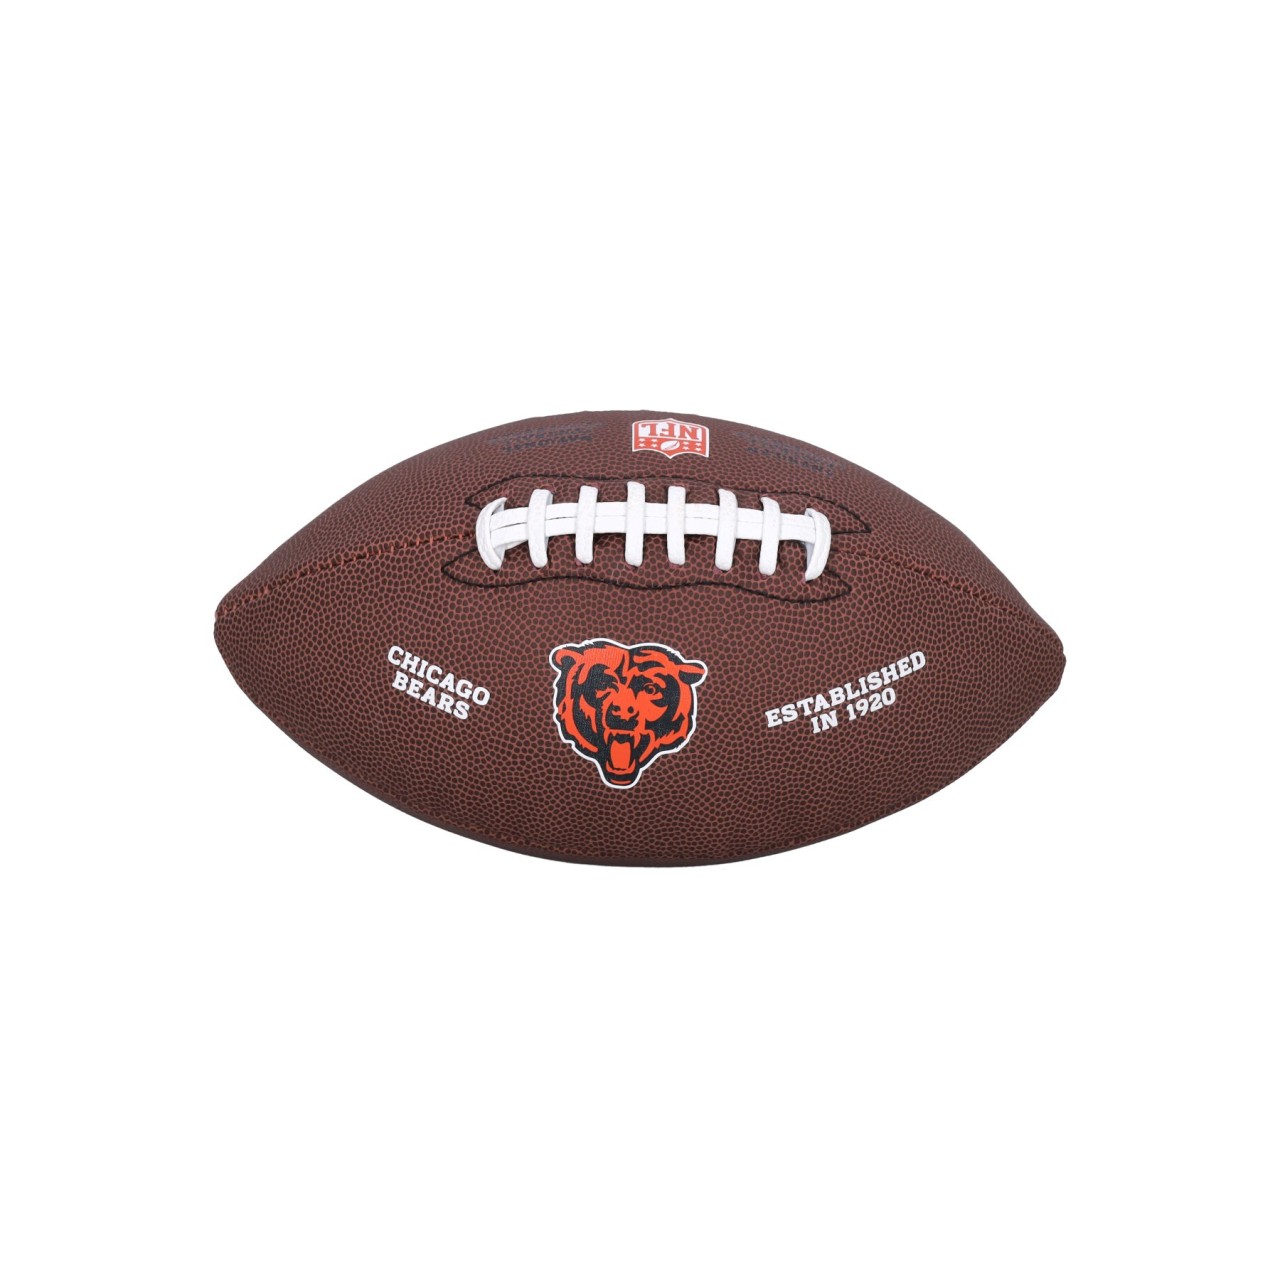 WILSON TEAM NFL LICENSED FOOTBALL CHIBEA WTF1748XBCH